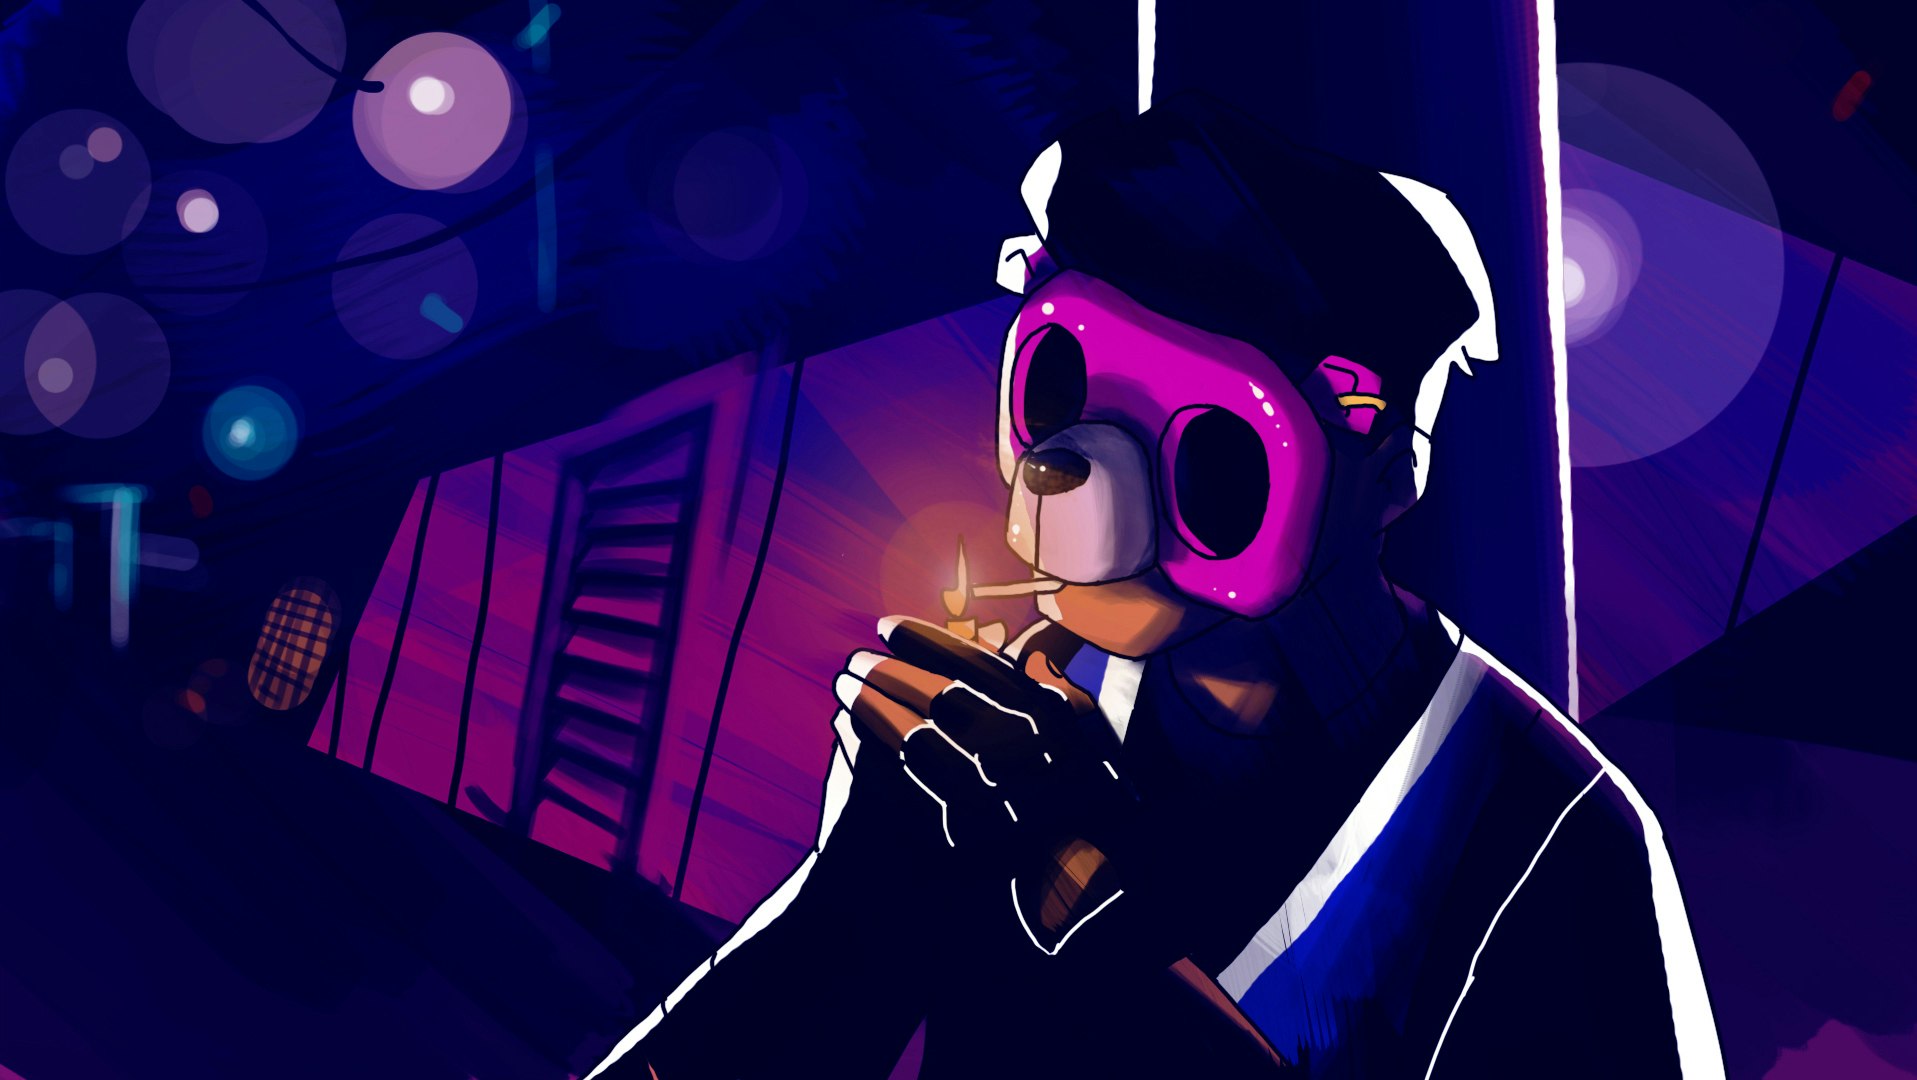 Concept illustration of a character with a mask smoking a cigarette